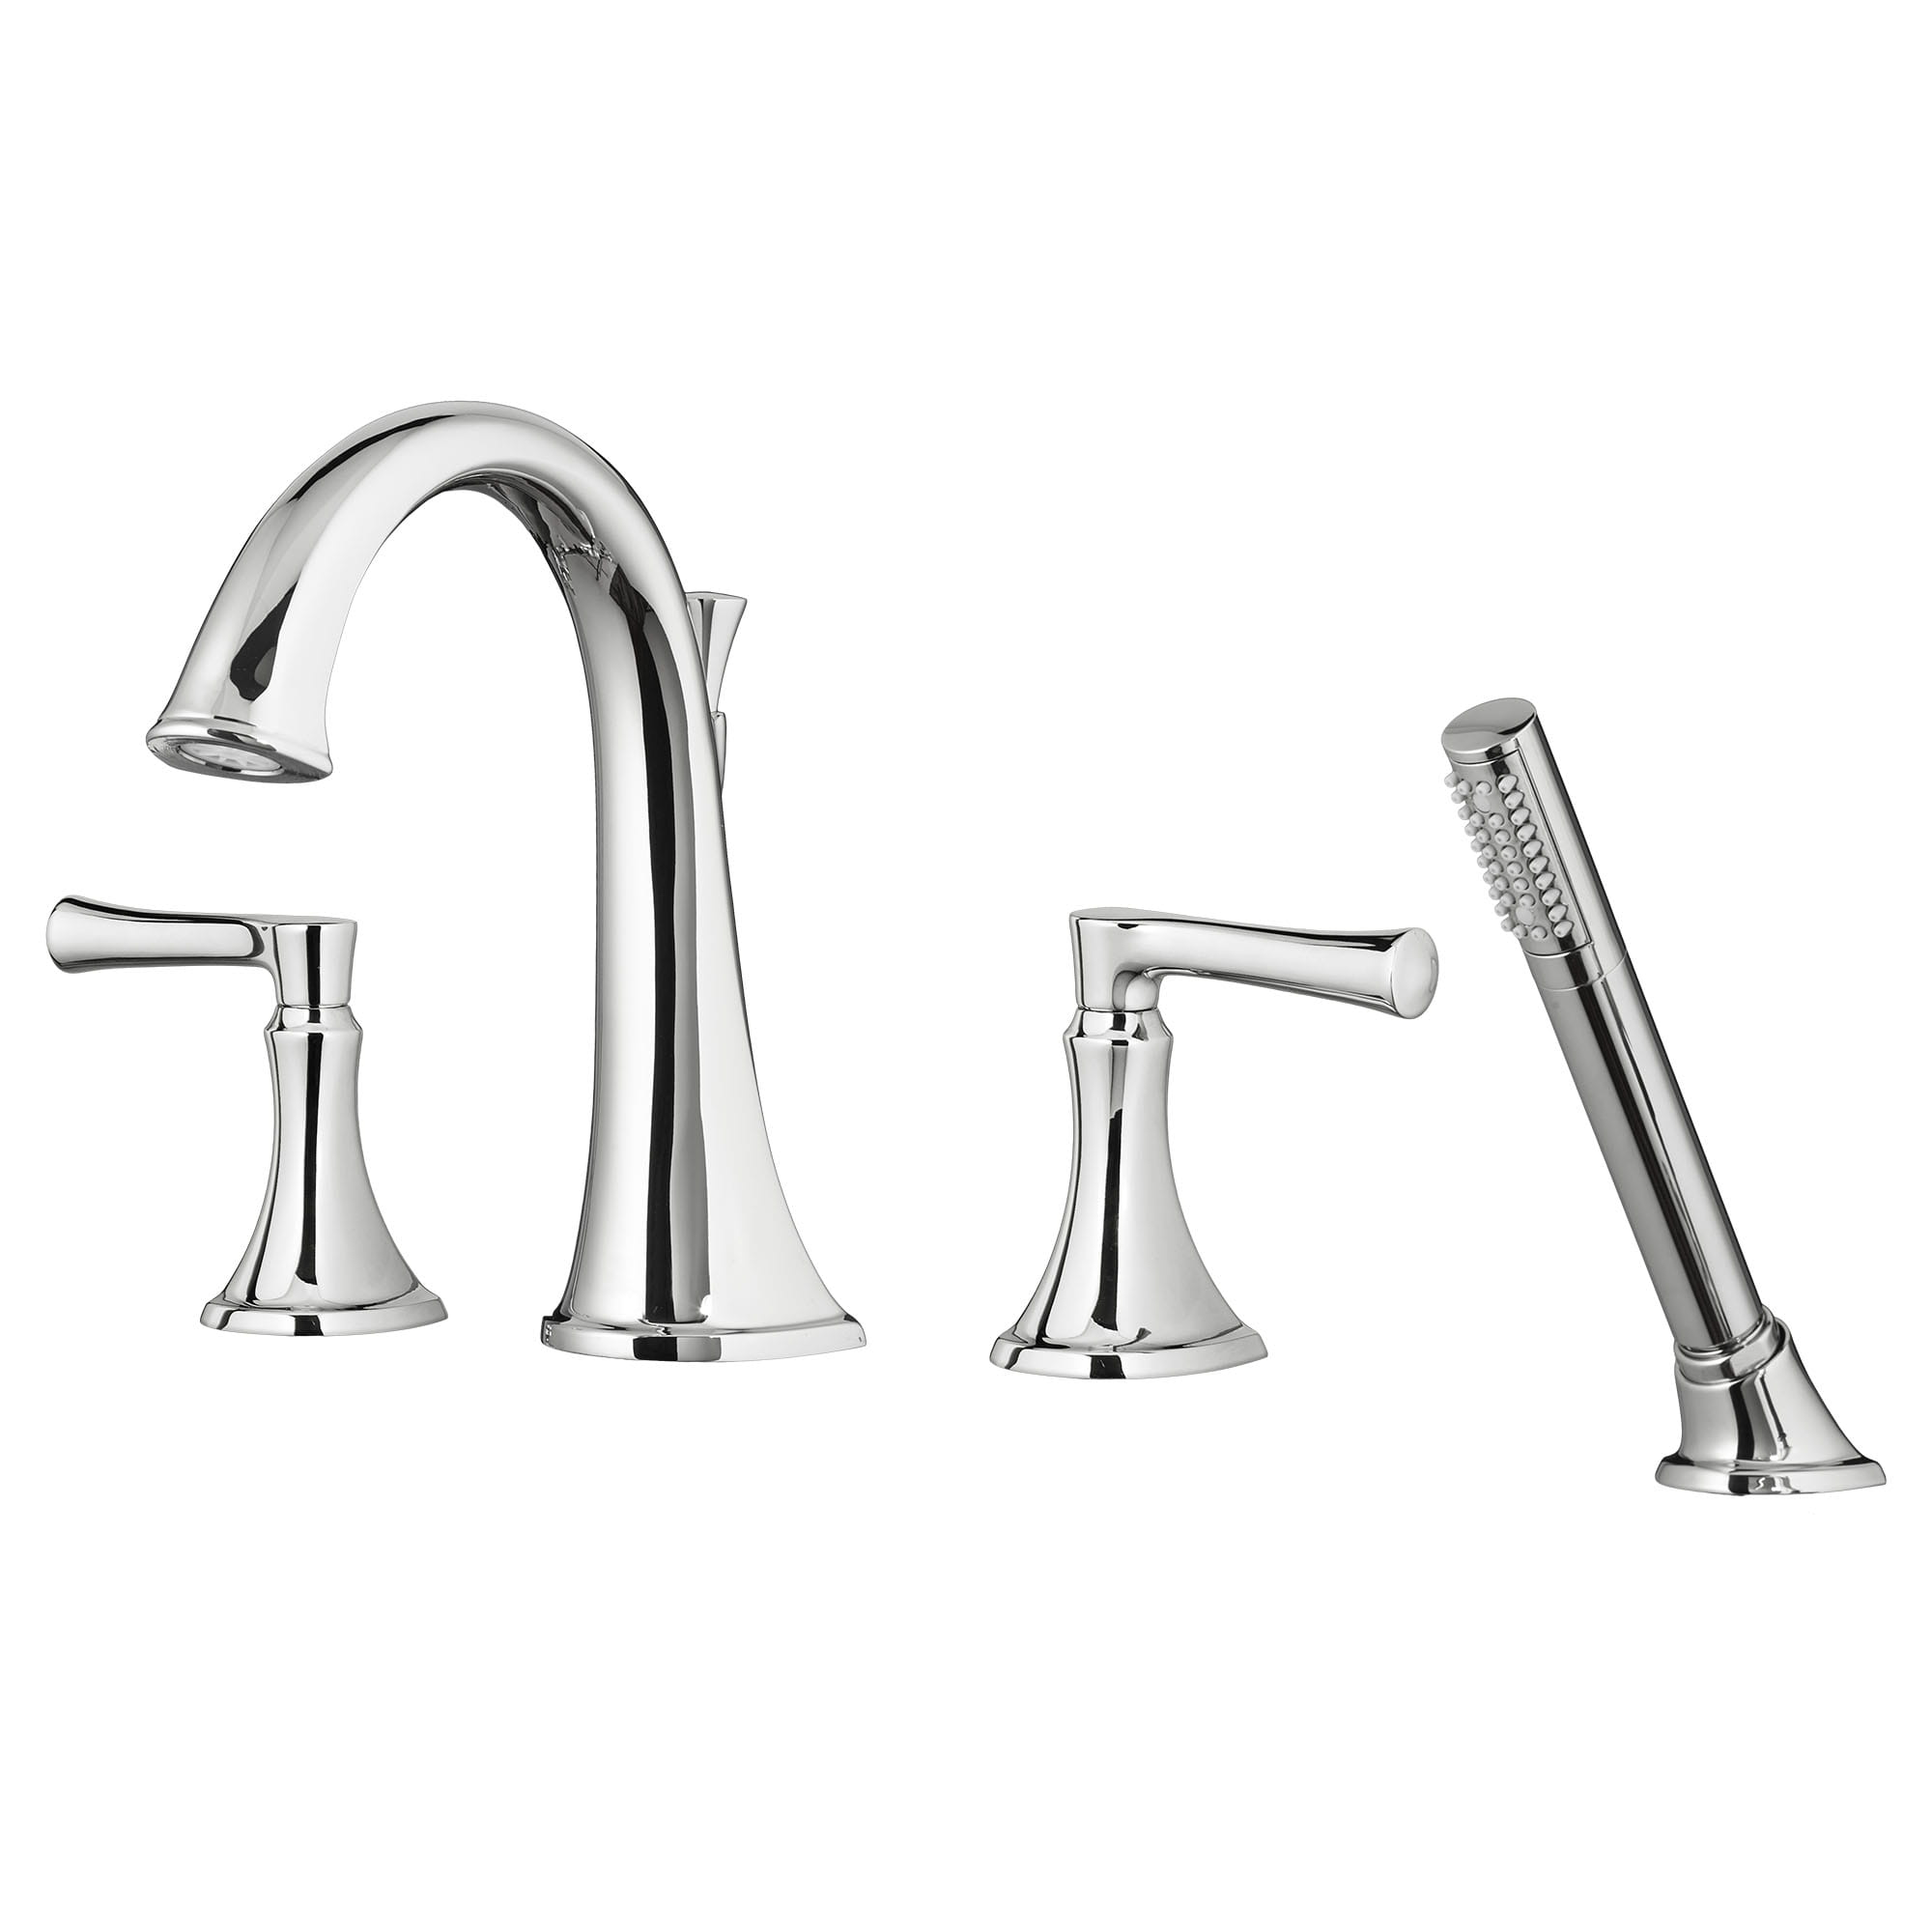 Estate Bathtub Faucet With Personal Shower for Flash Rough In Valve With Lever Handles CHROME